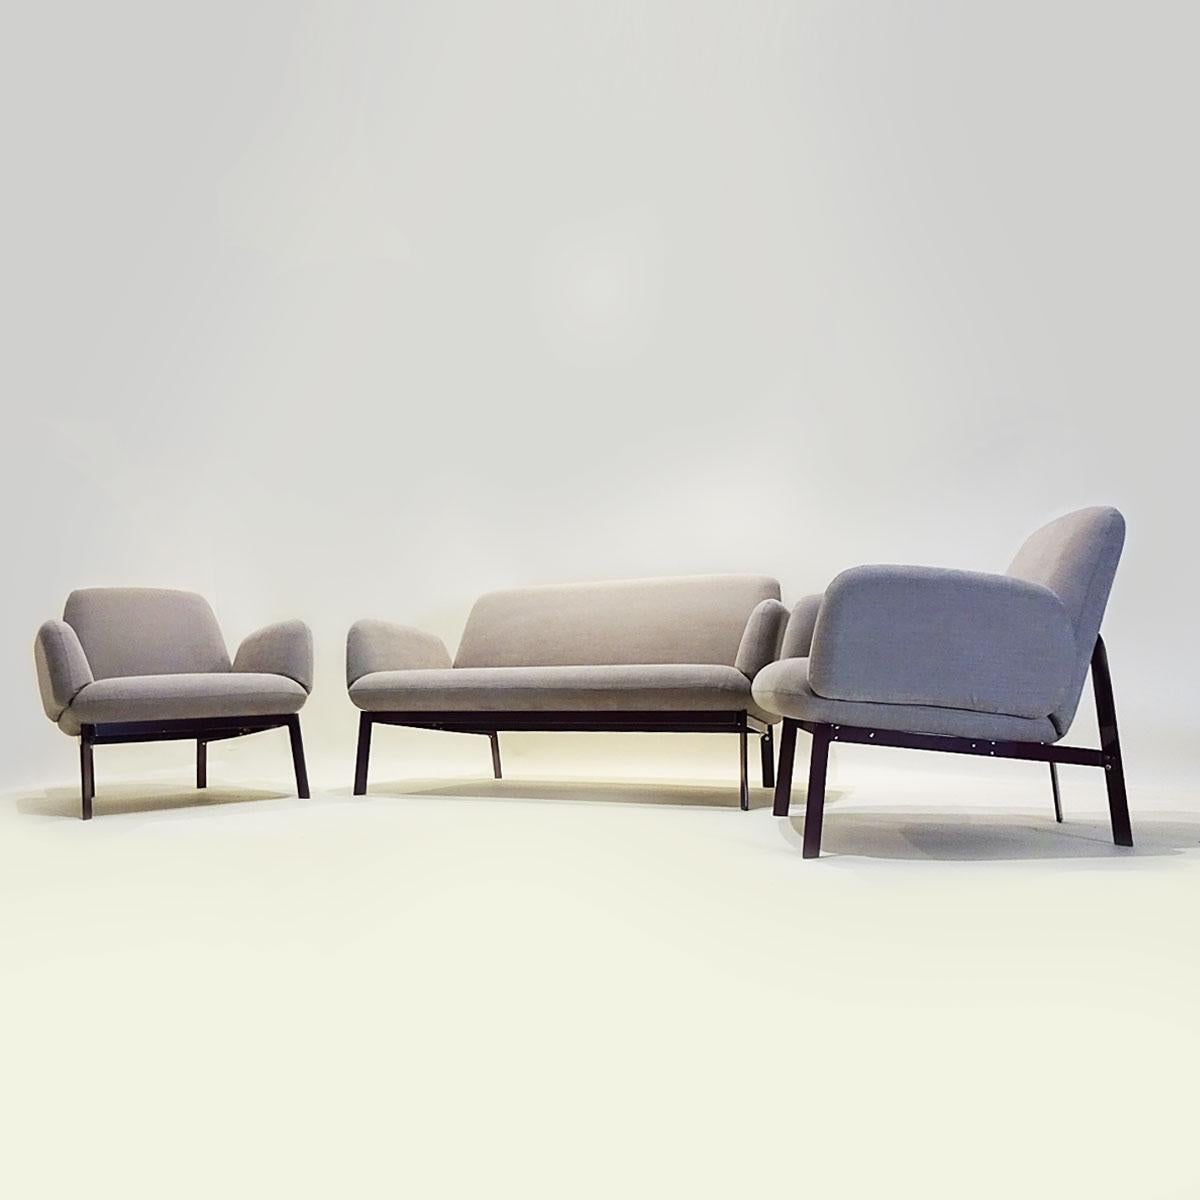 Modern Klauser and Carpenter Contemporary Vintage Compact Easy Chair and Sofa Set